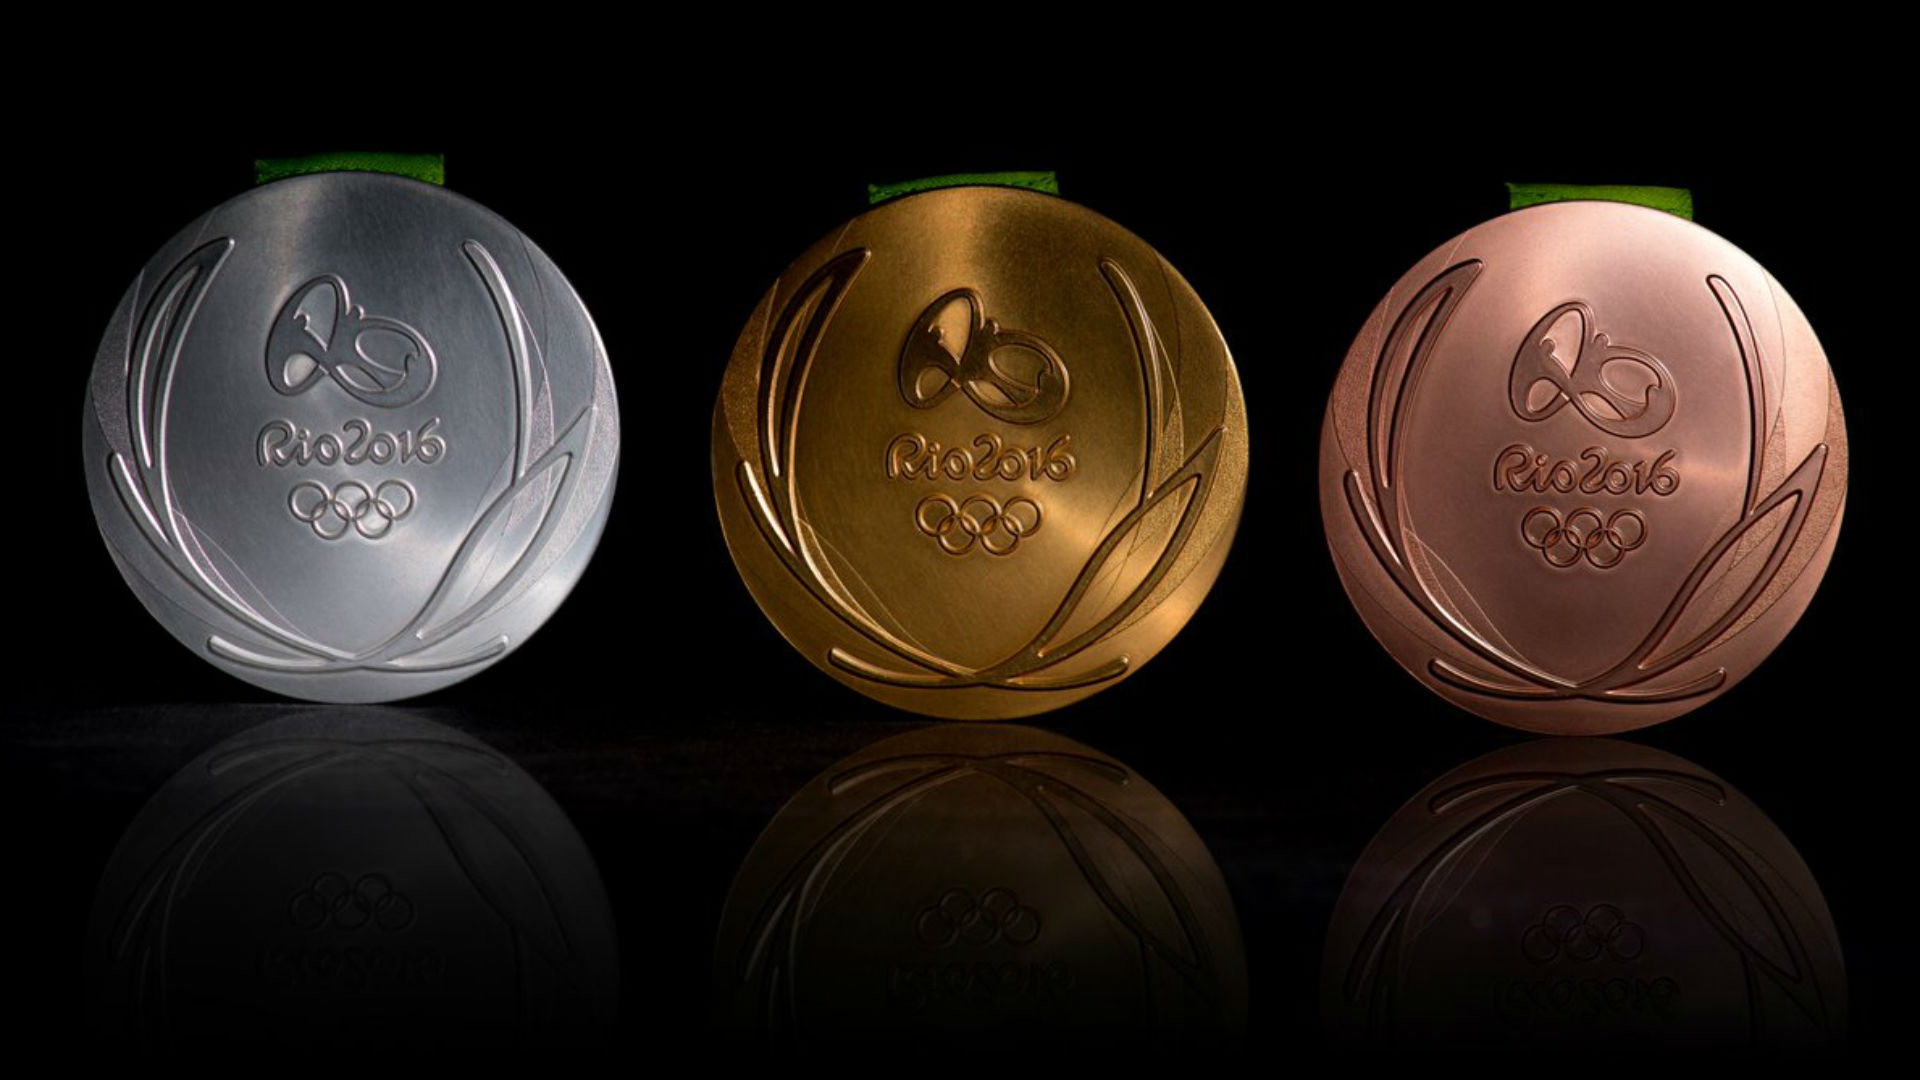 Rio 2016 Medals Olympic Games